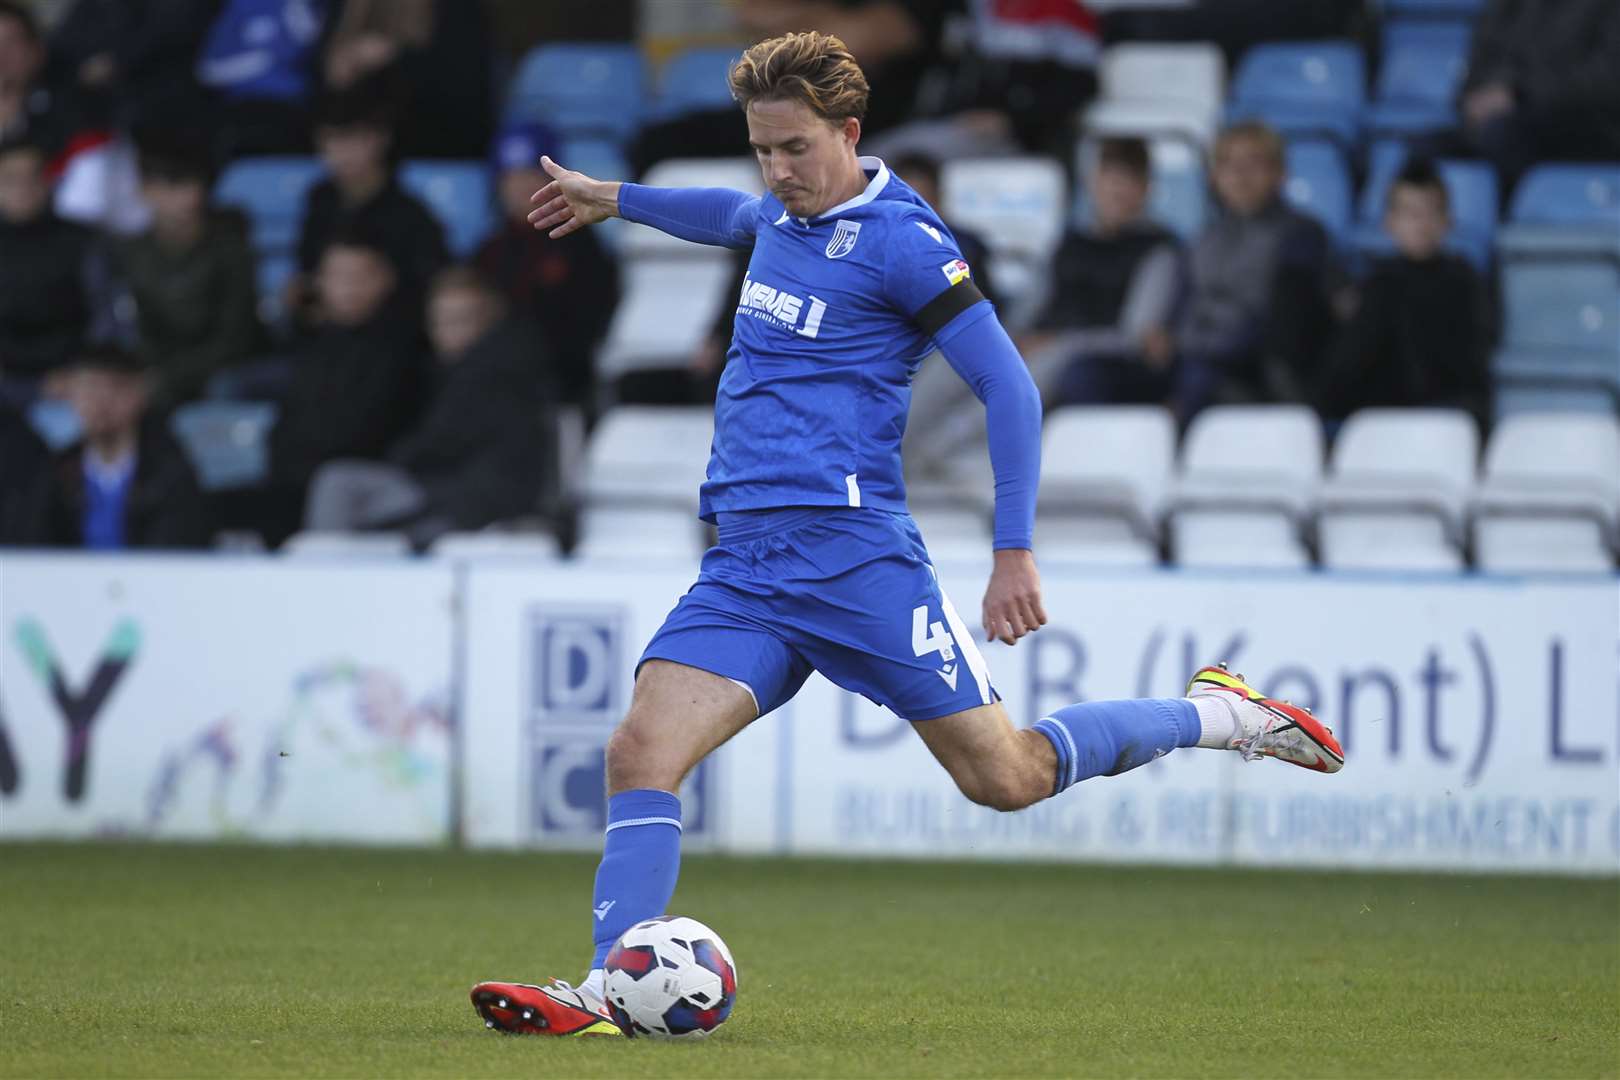 Will Wright has impressed with his set-piece delivery for Gillingham. Picture: KPI